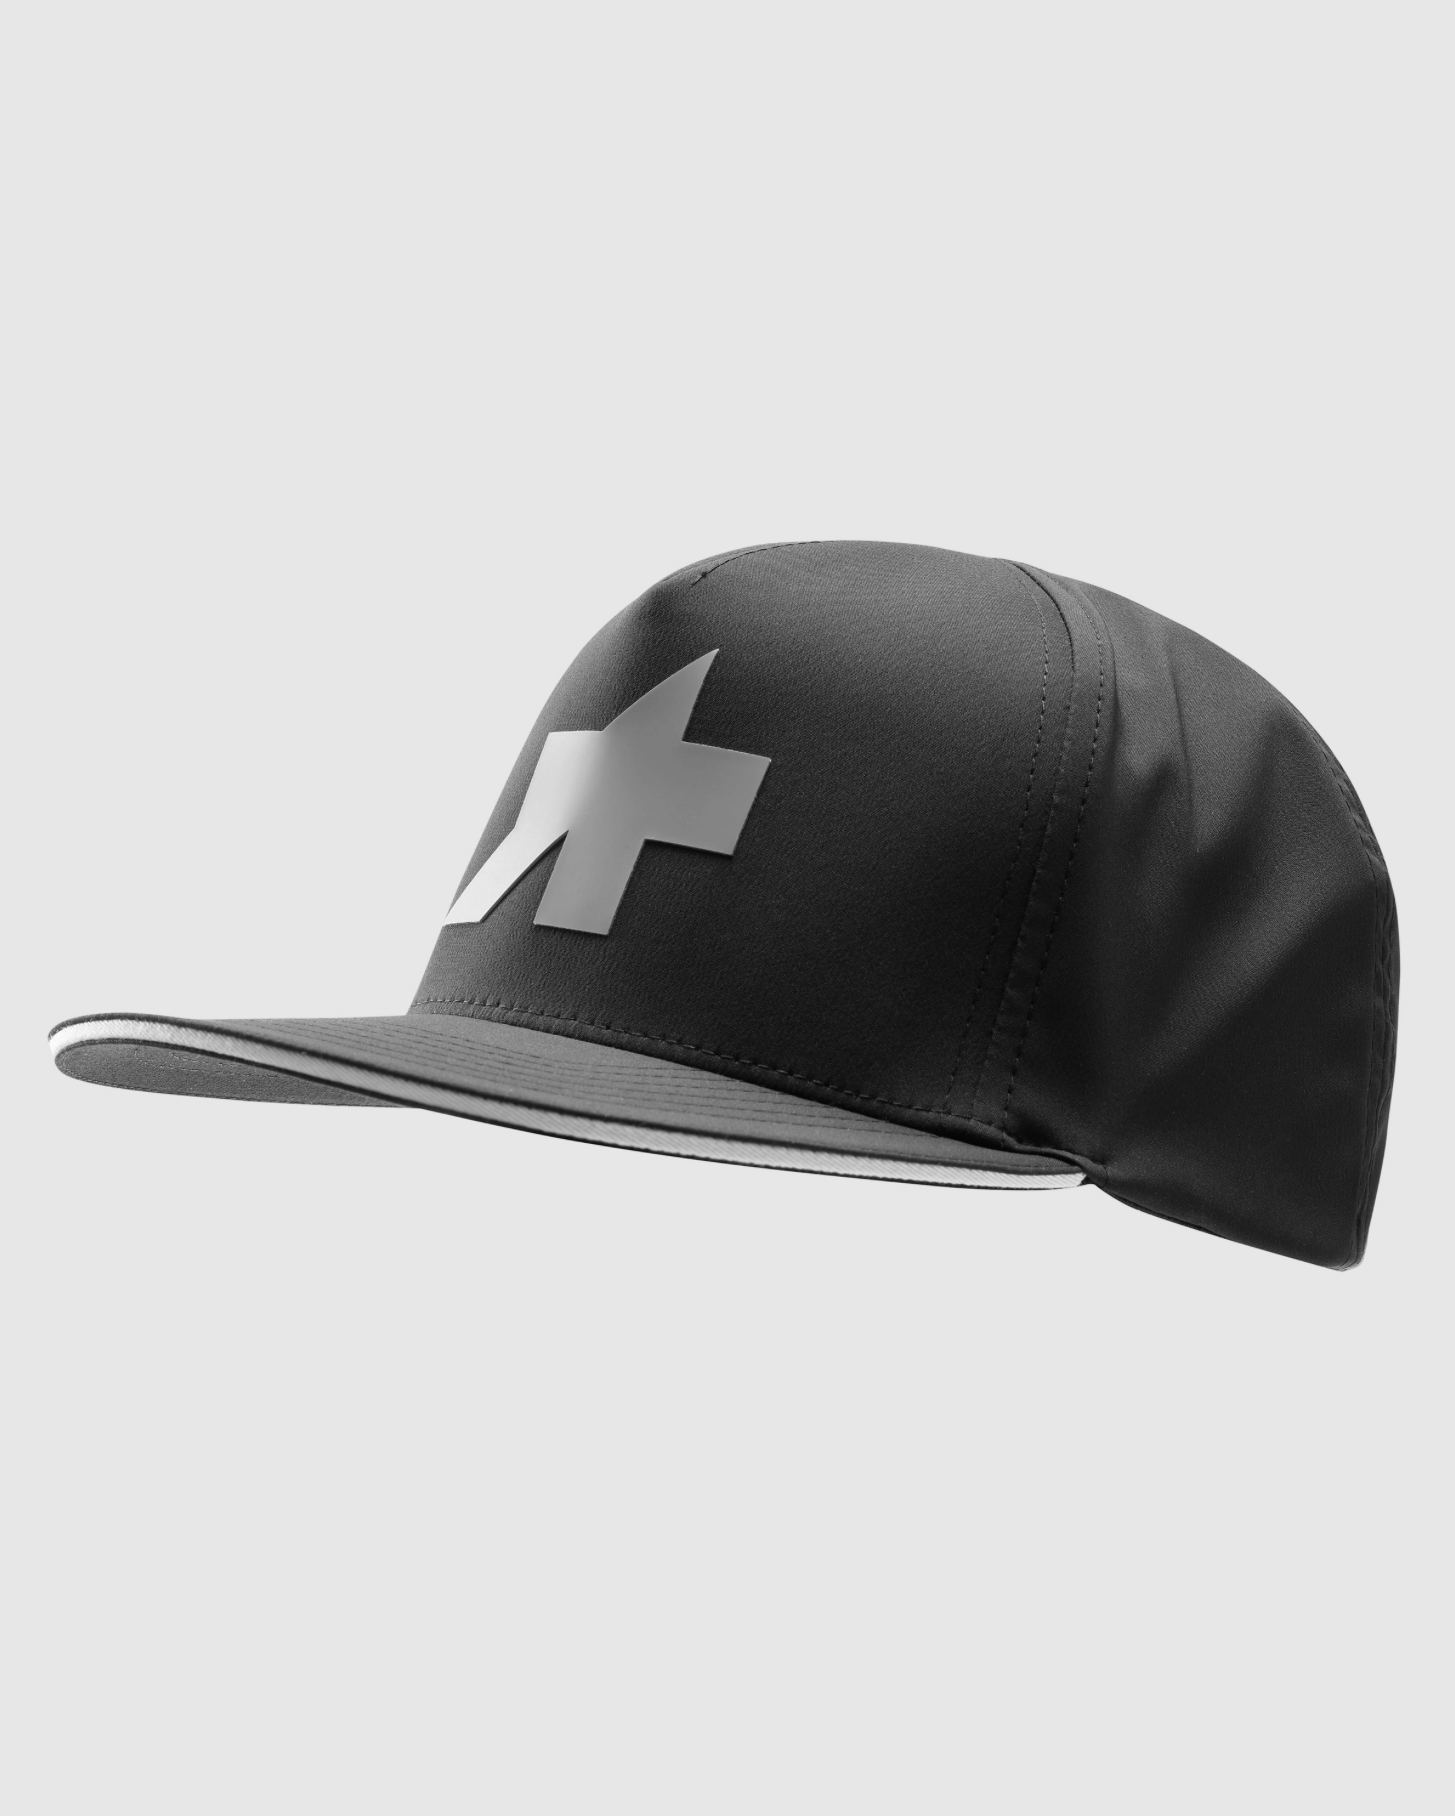 Approved cycling Assos cap